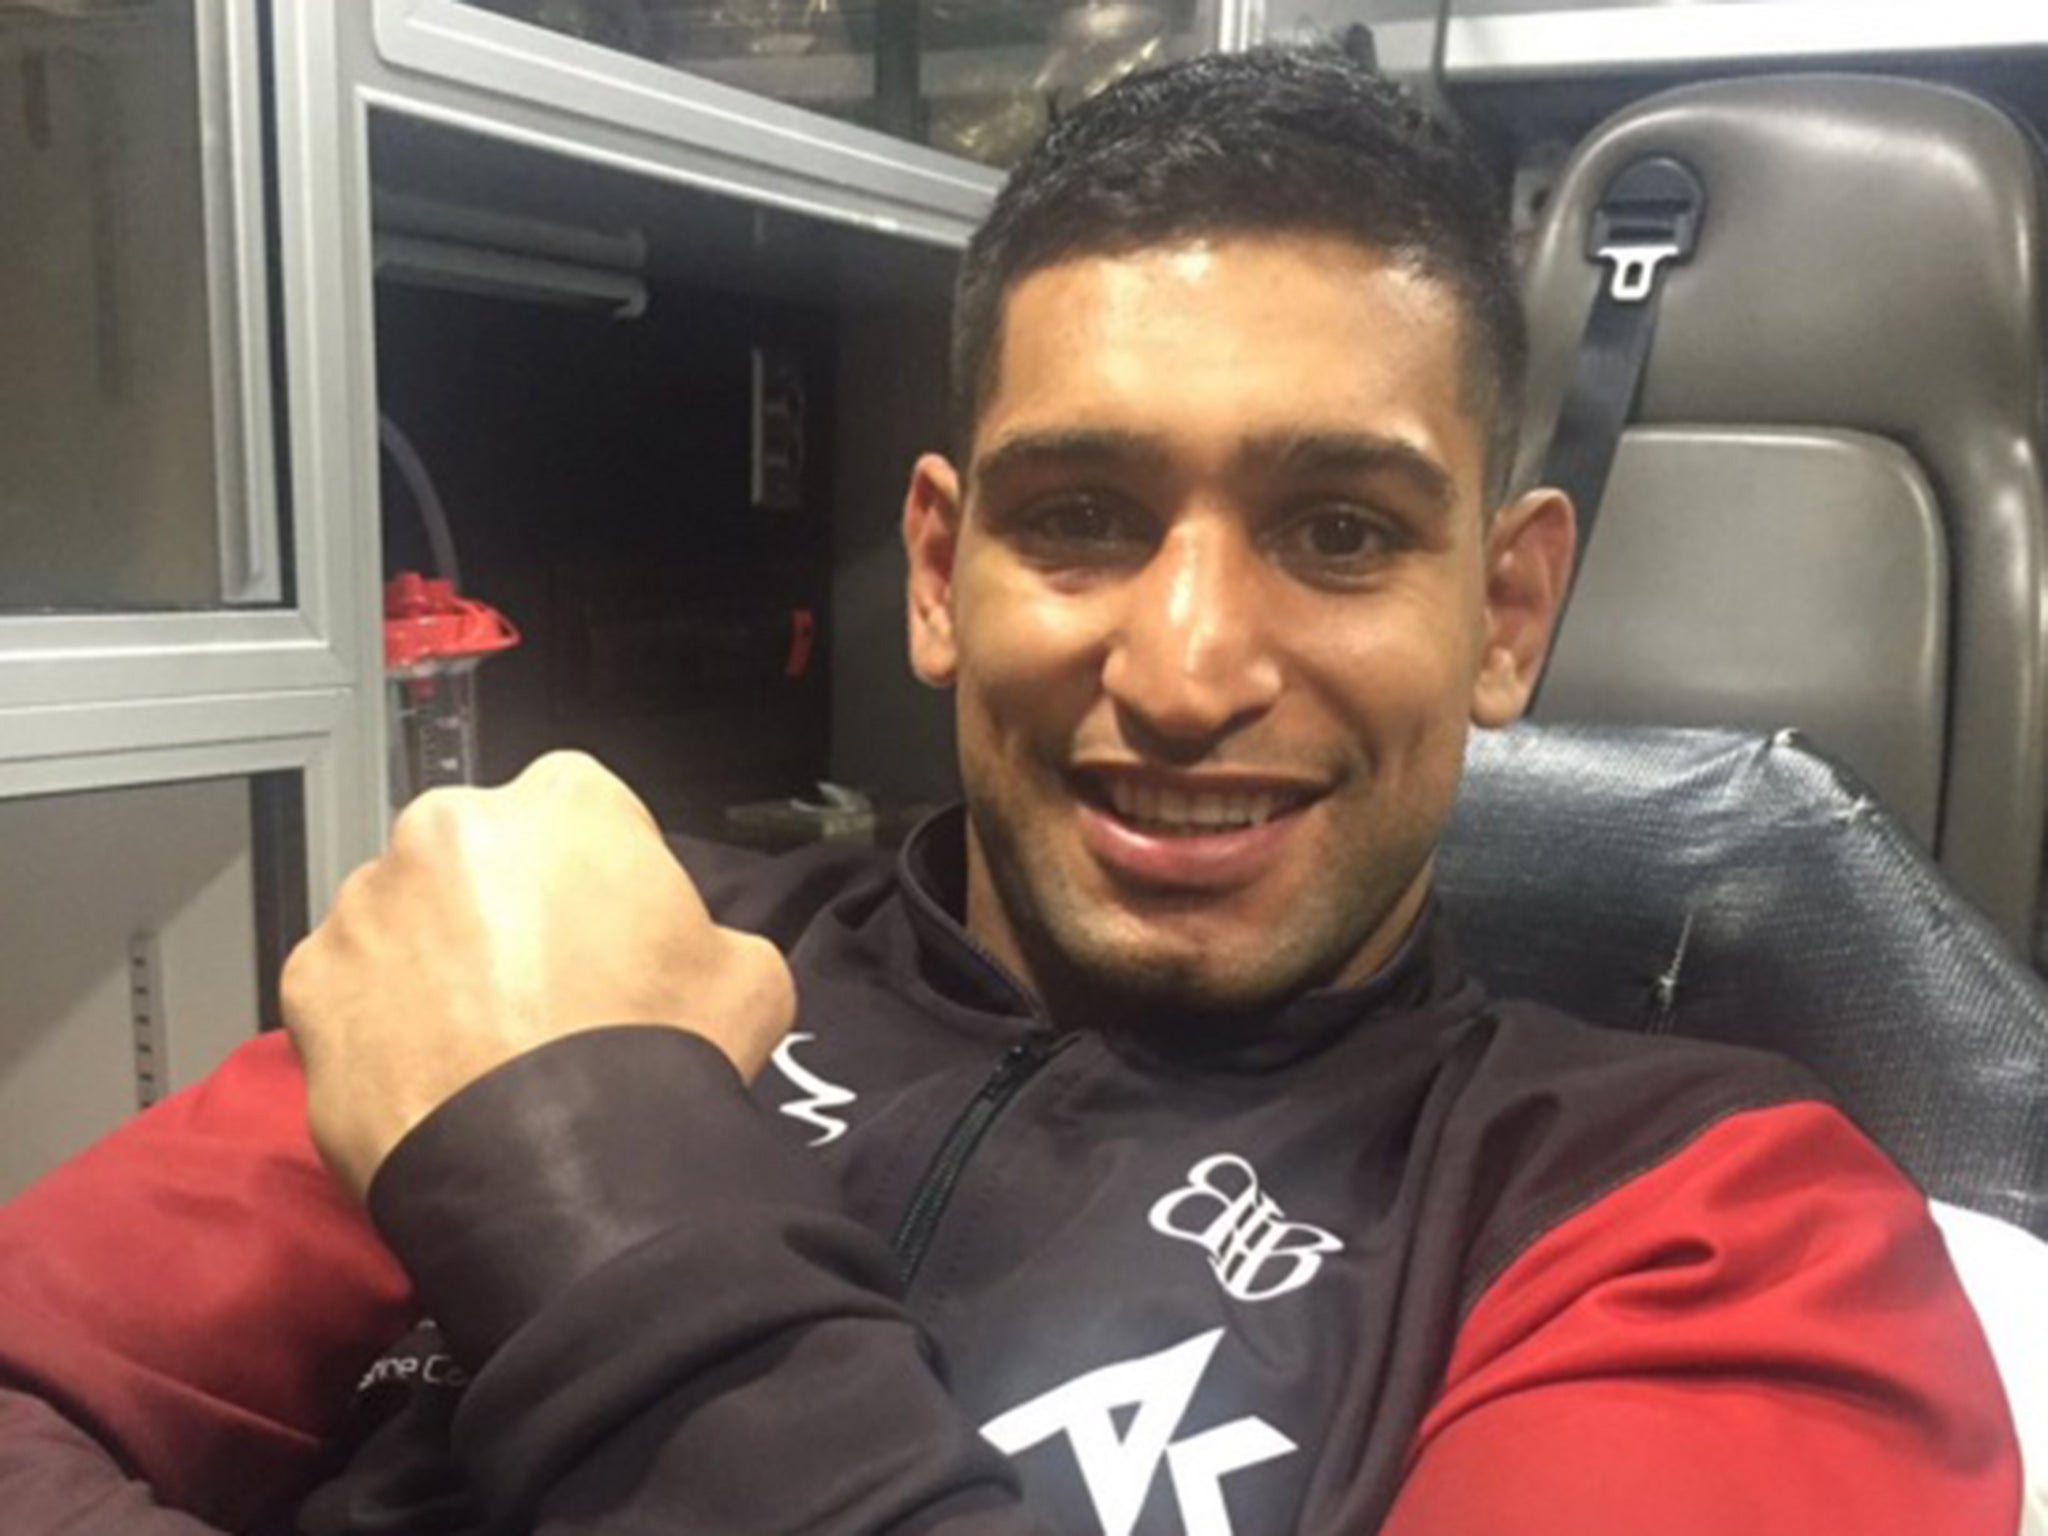 Khan tweeted this image from hospital after the fight